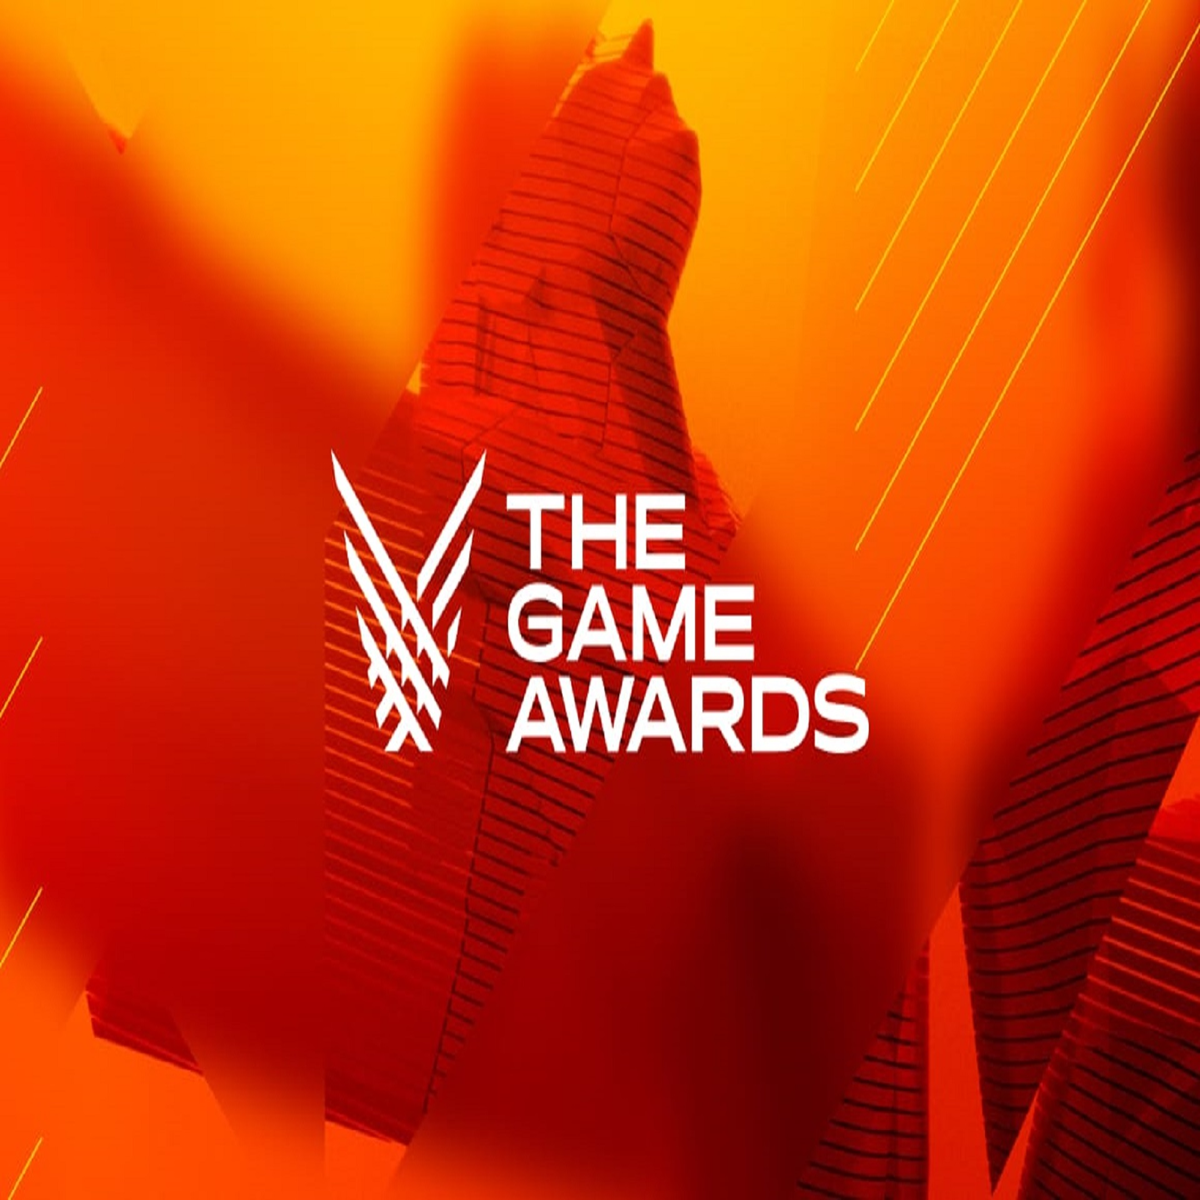 The Game Awards 2022 Date and Time Announced, Tickets Available